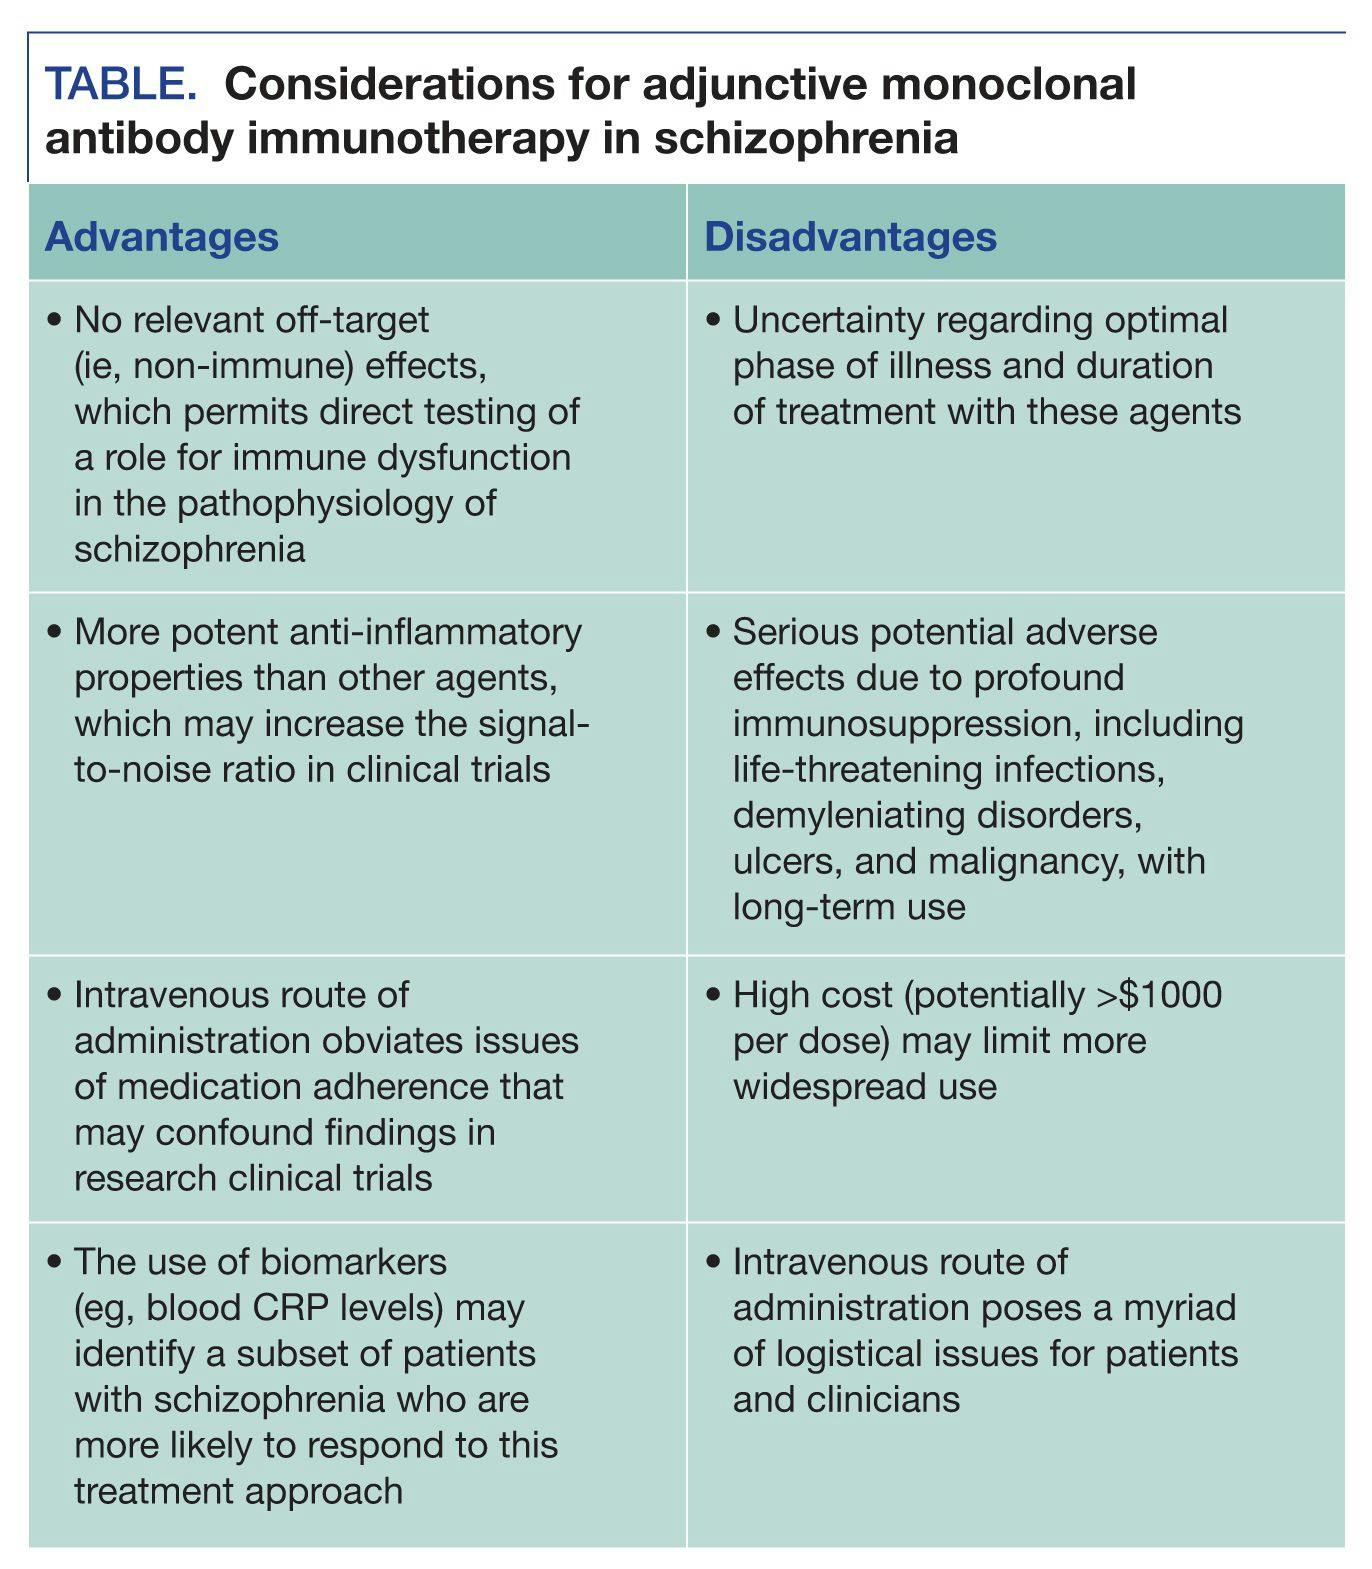 Considerations for adjunctive monoclonal antibody immunotherapy in schizophrenia